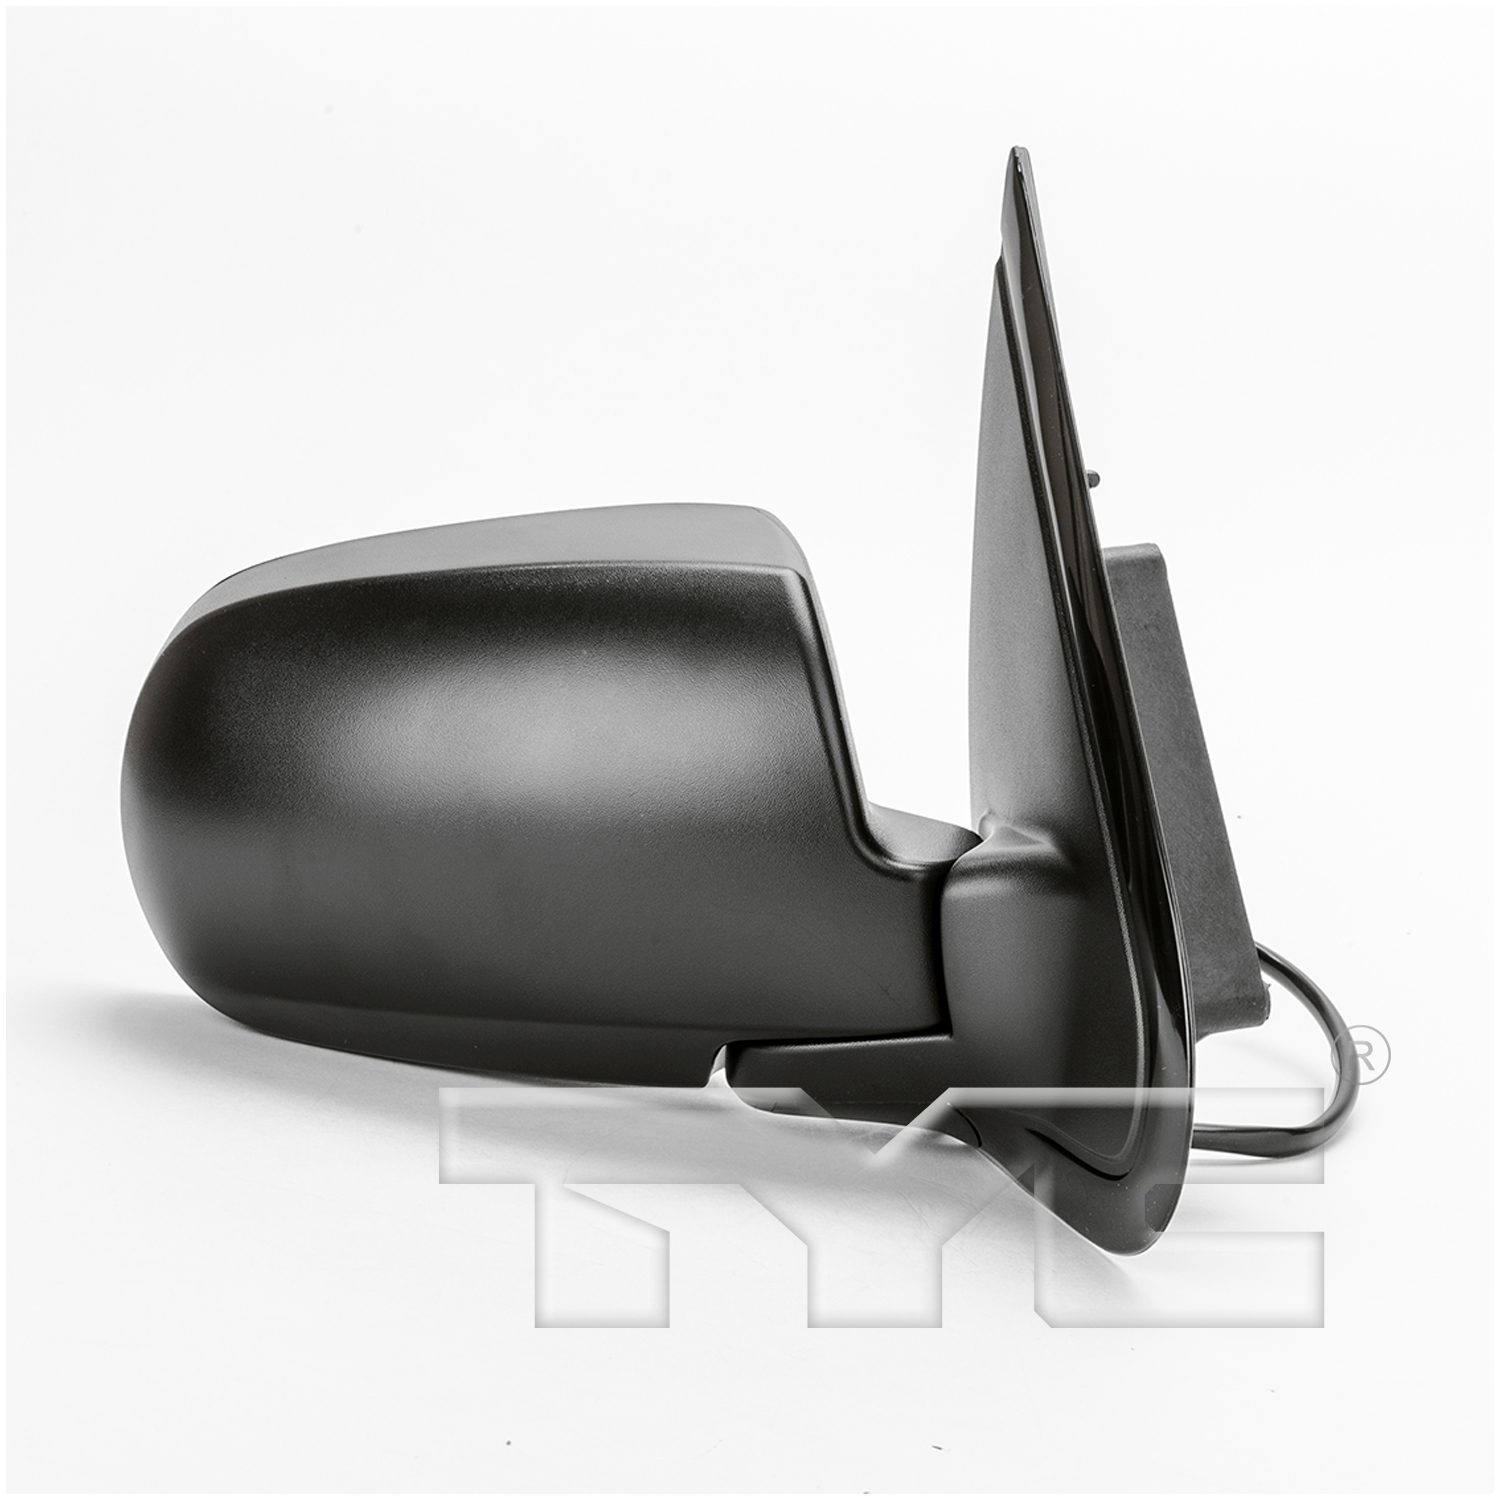 Aftermarket MIRRORS for FORD - ESCAPE, ESCAPE,01-07,RT Mirror outside rear view